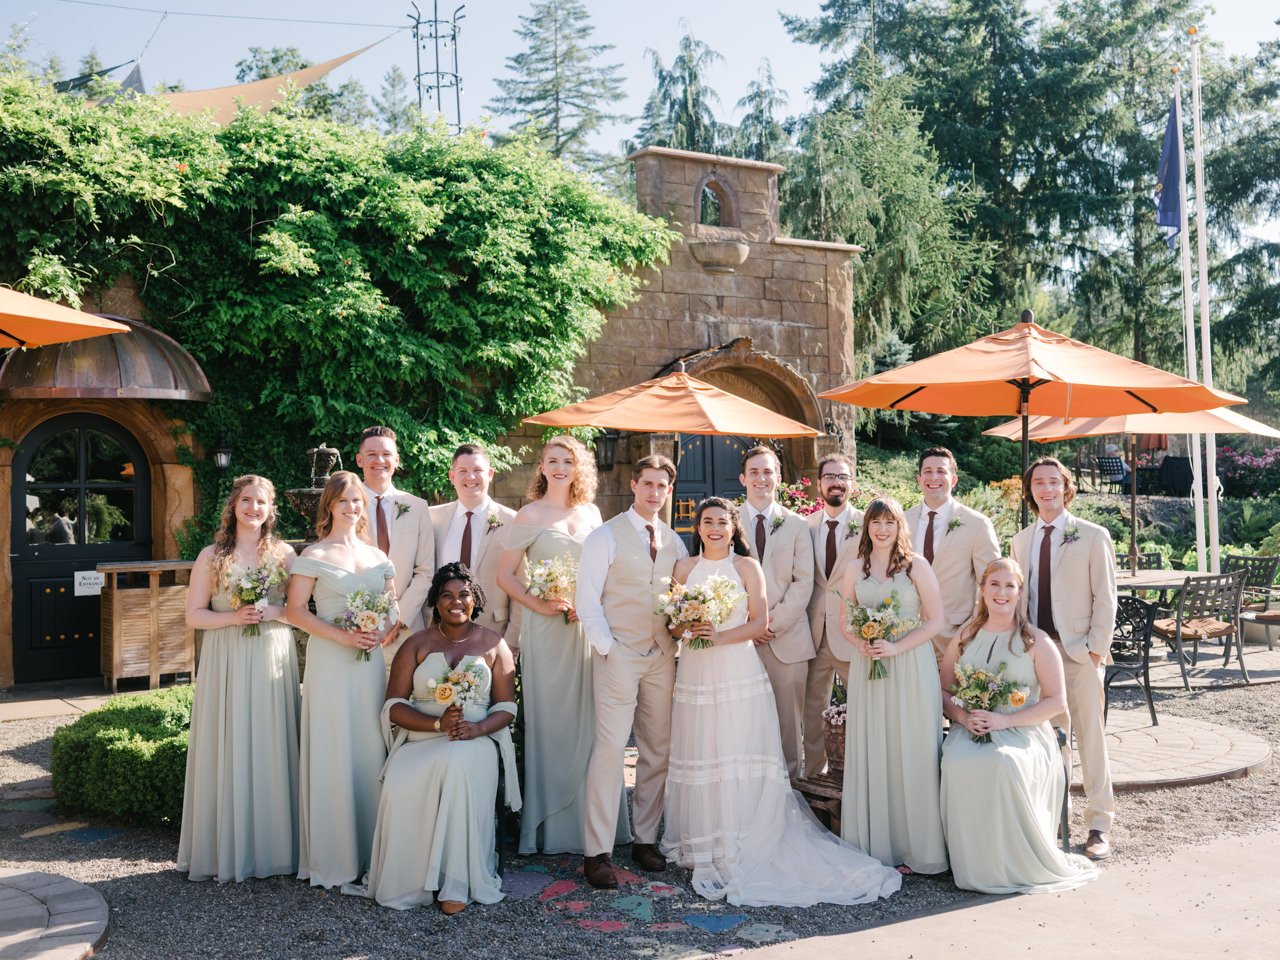  Formal wedding party portrait at reustle prayer rock vineyard with bridesmaids in green dress and groomsmen in tan suits 